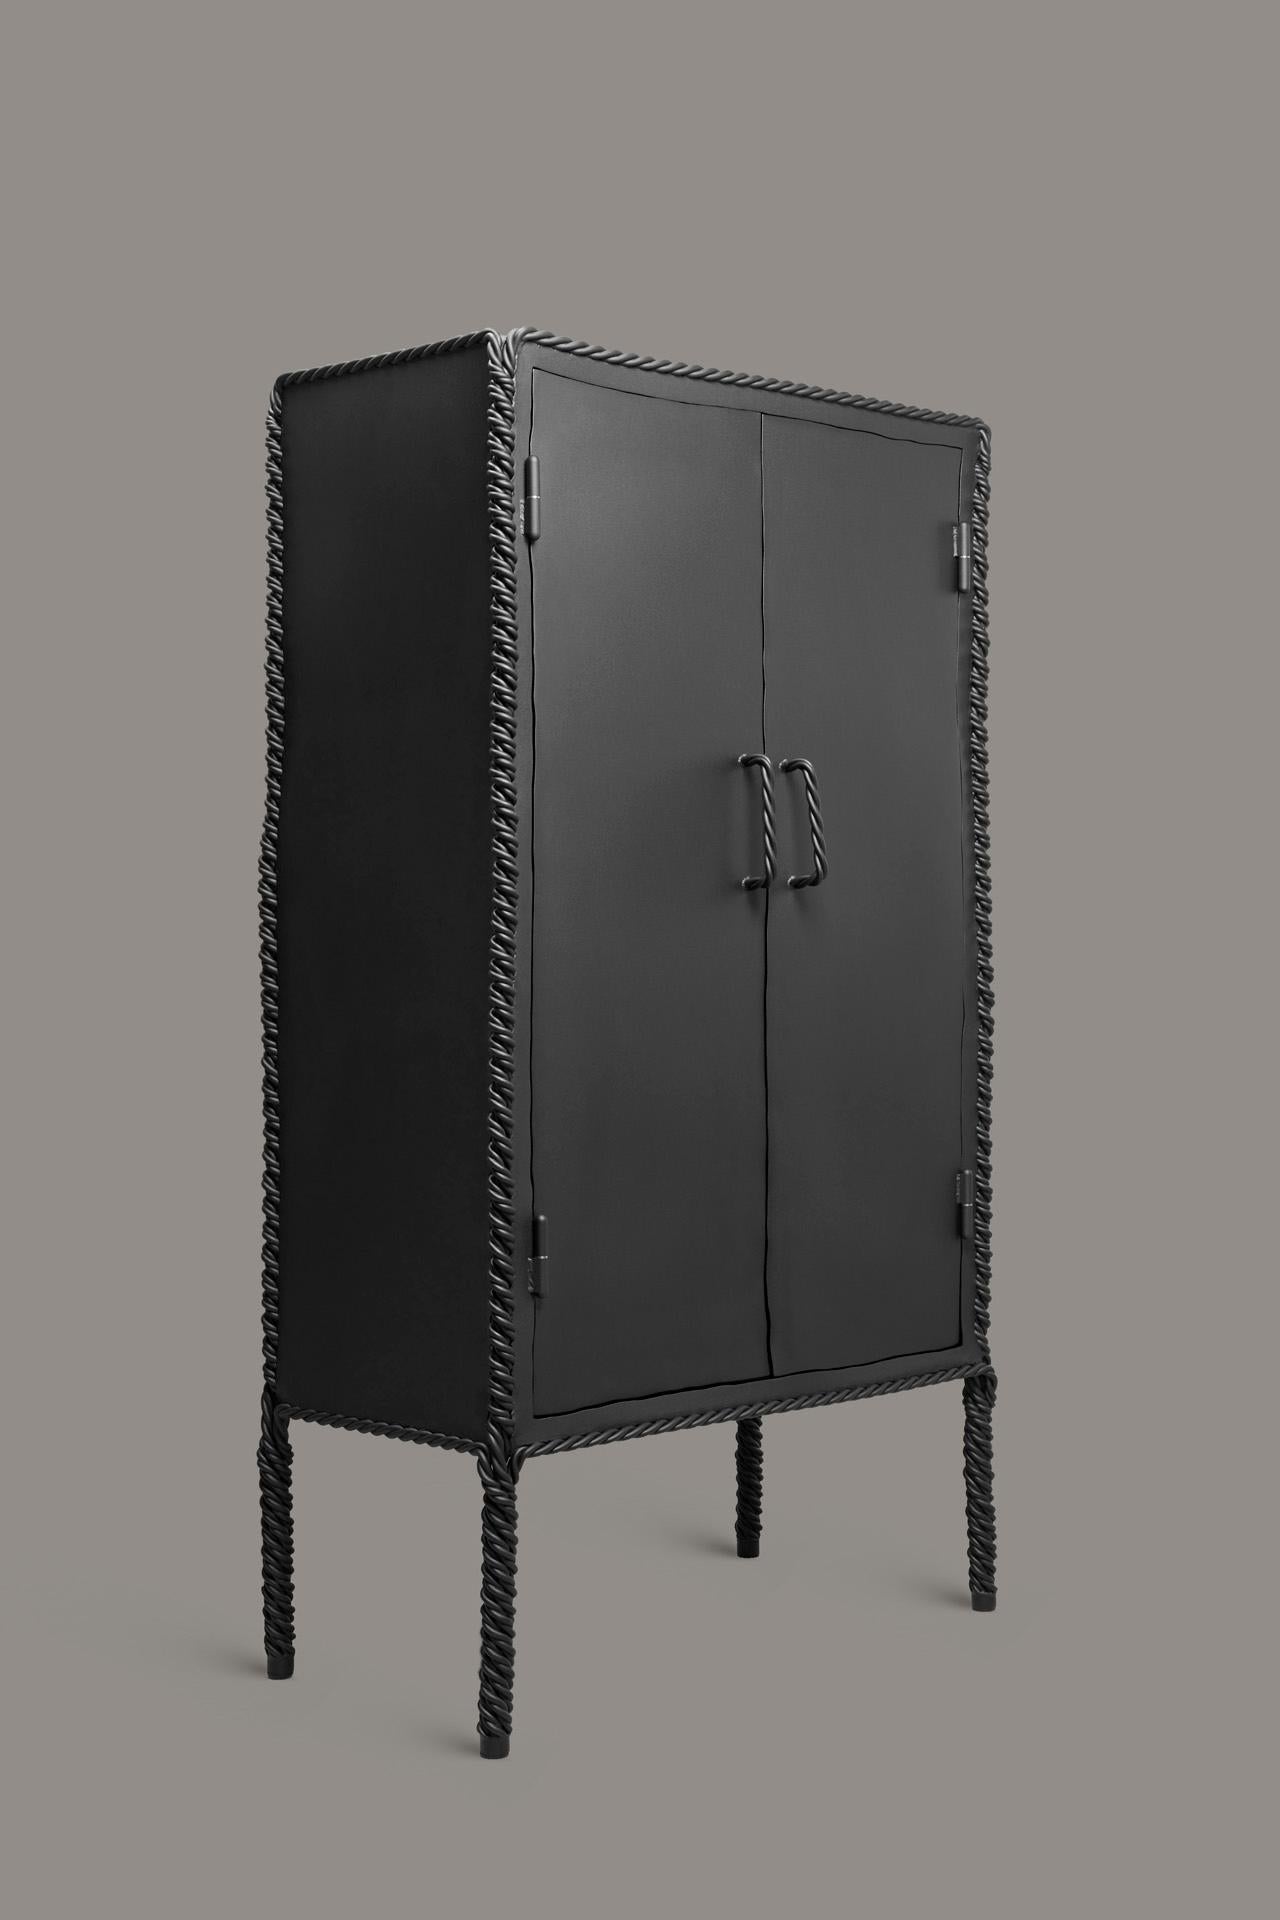 Dutch Contemporary Black Steel Twisted Cabinet XL by Ward Wijnant For Sale